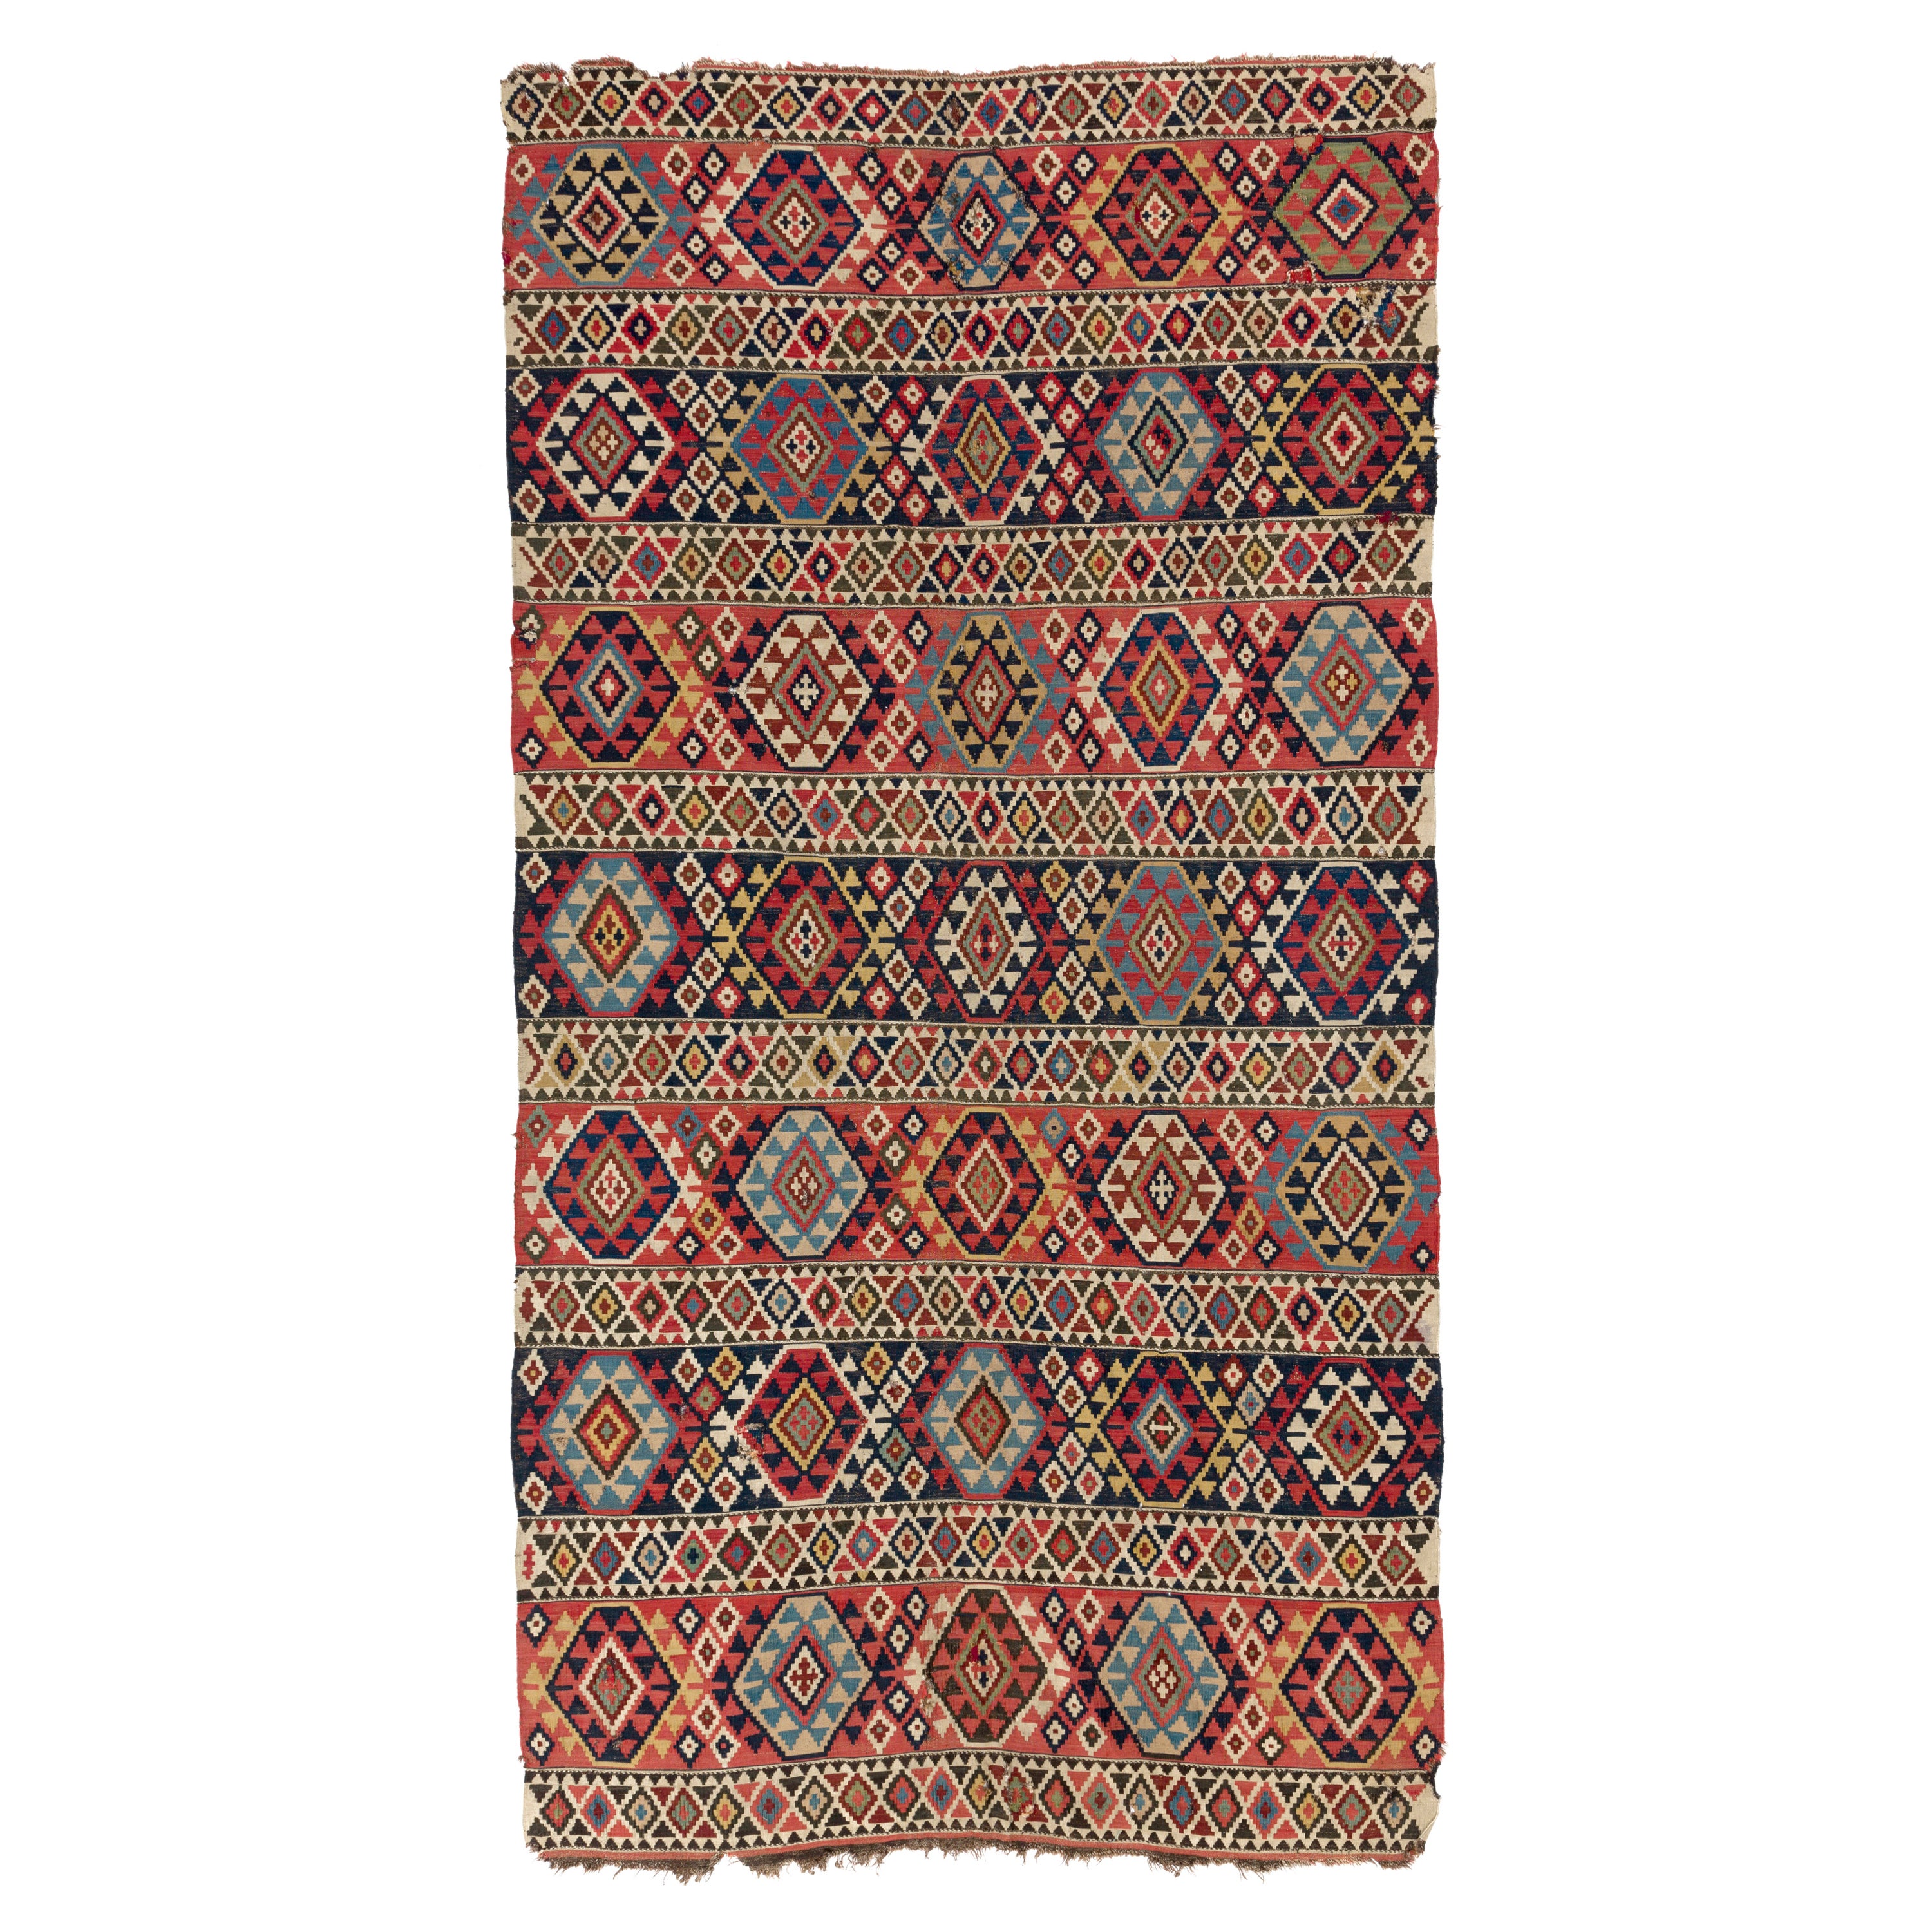 5.2x10 Ft Antique Caucasian Shirvan Kilim Rug, Ca 1870, 100% Wool & Natural Dyes For Sale